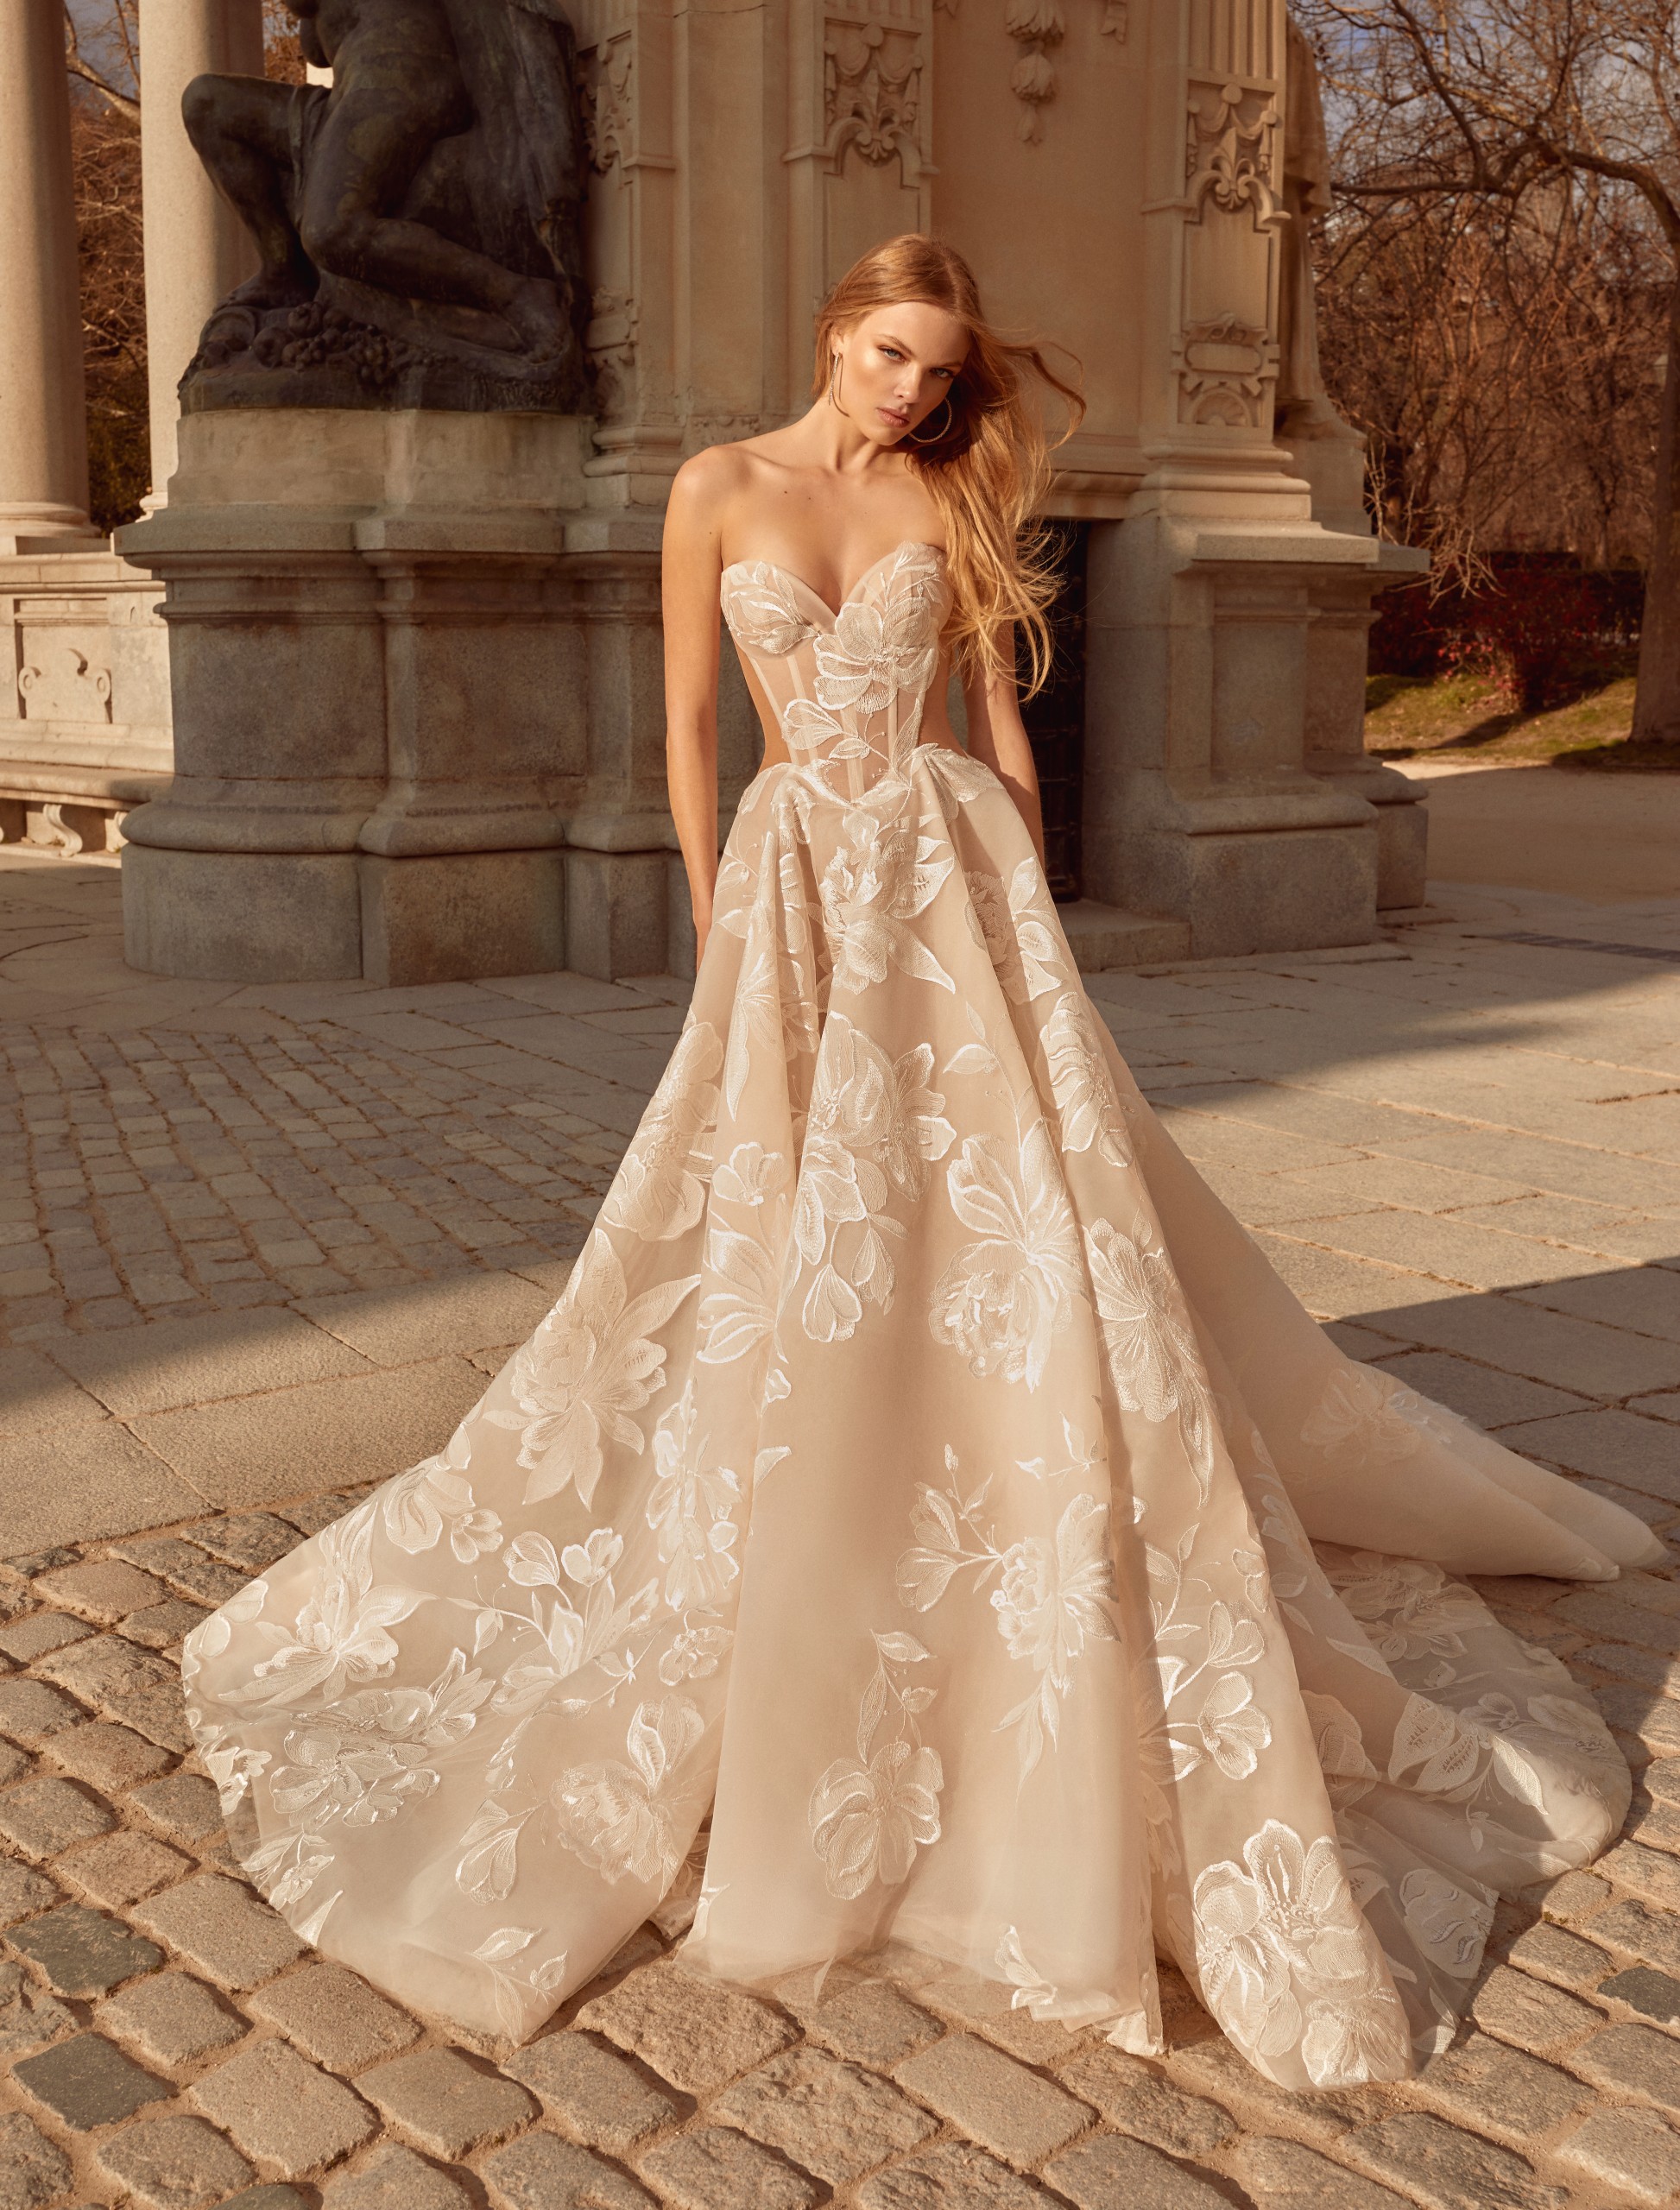 Bella Bianca Bridal Couture, New Arrival Alert ✨ Say Hello to 'Evelyn' by  @galialahav! ⁣ Shop this dress and many more from the Galia Lahav  collection at our C